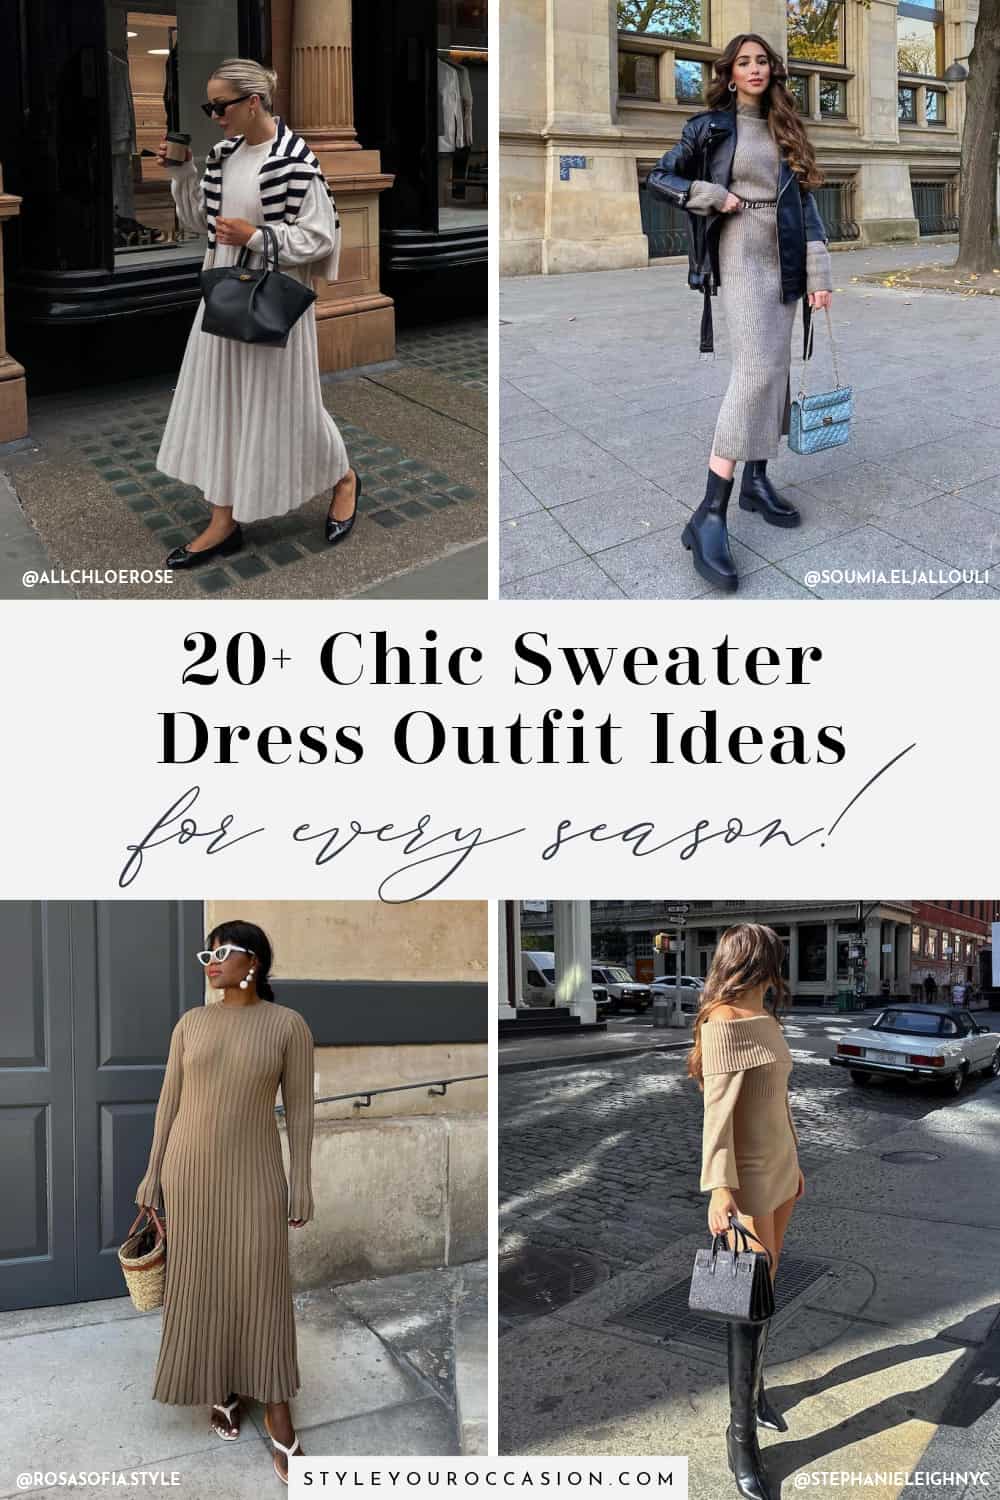 The Best Shoes To Wear With Sweater Dresses + 20 Chic Outfits